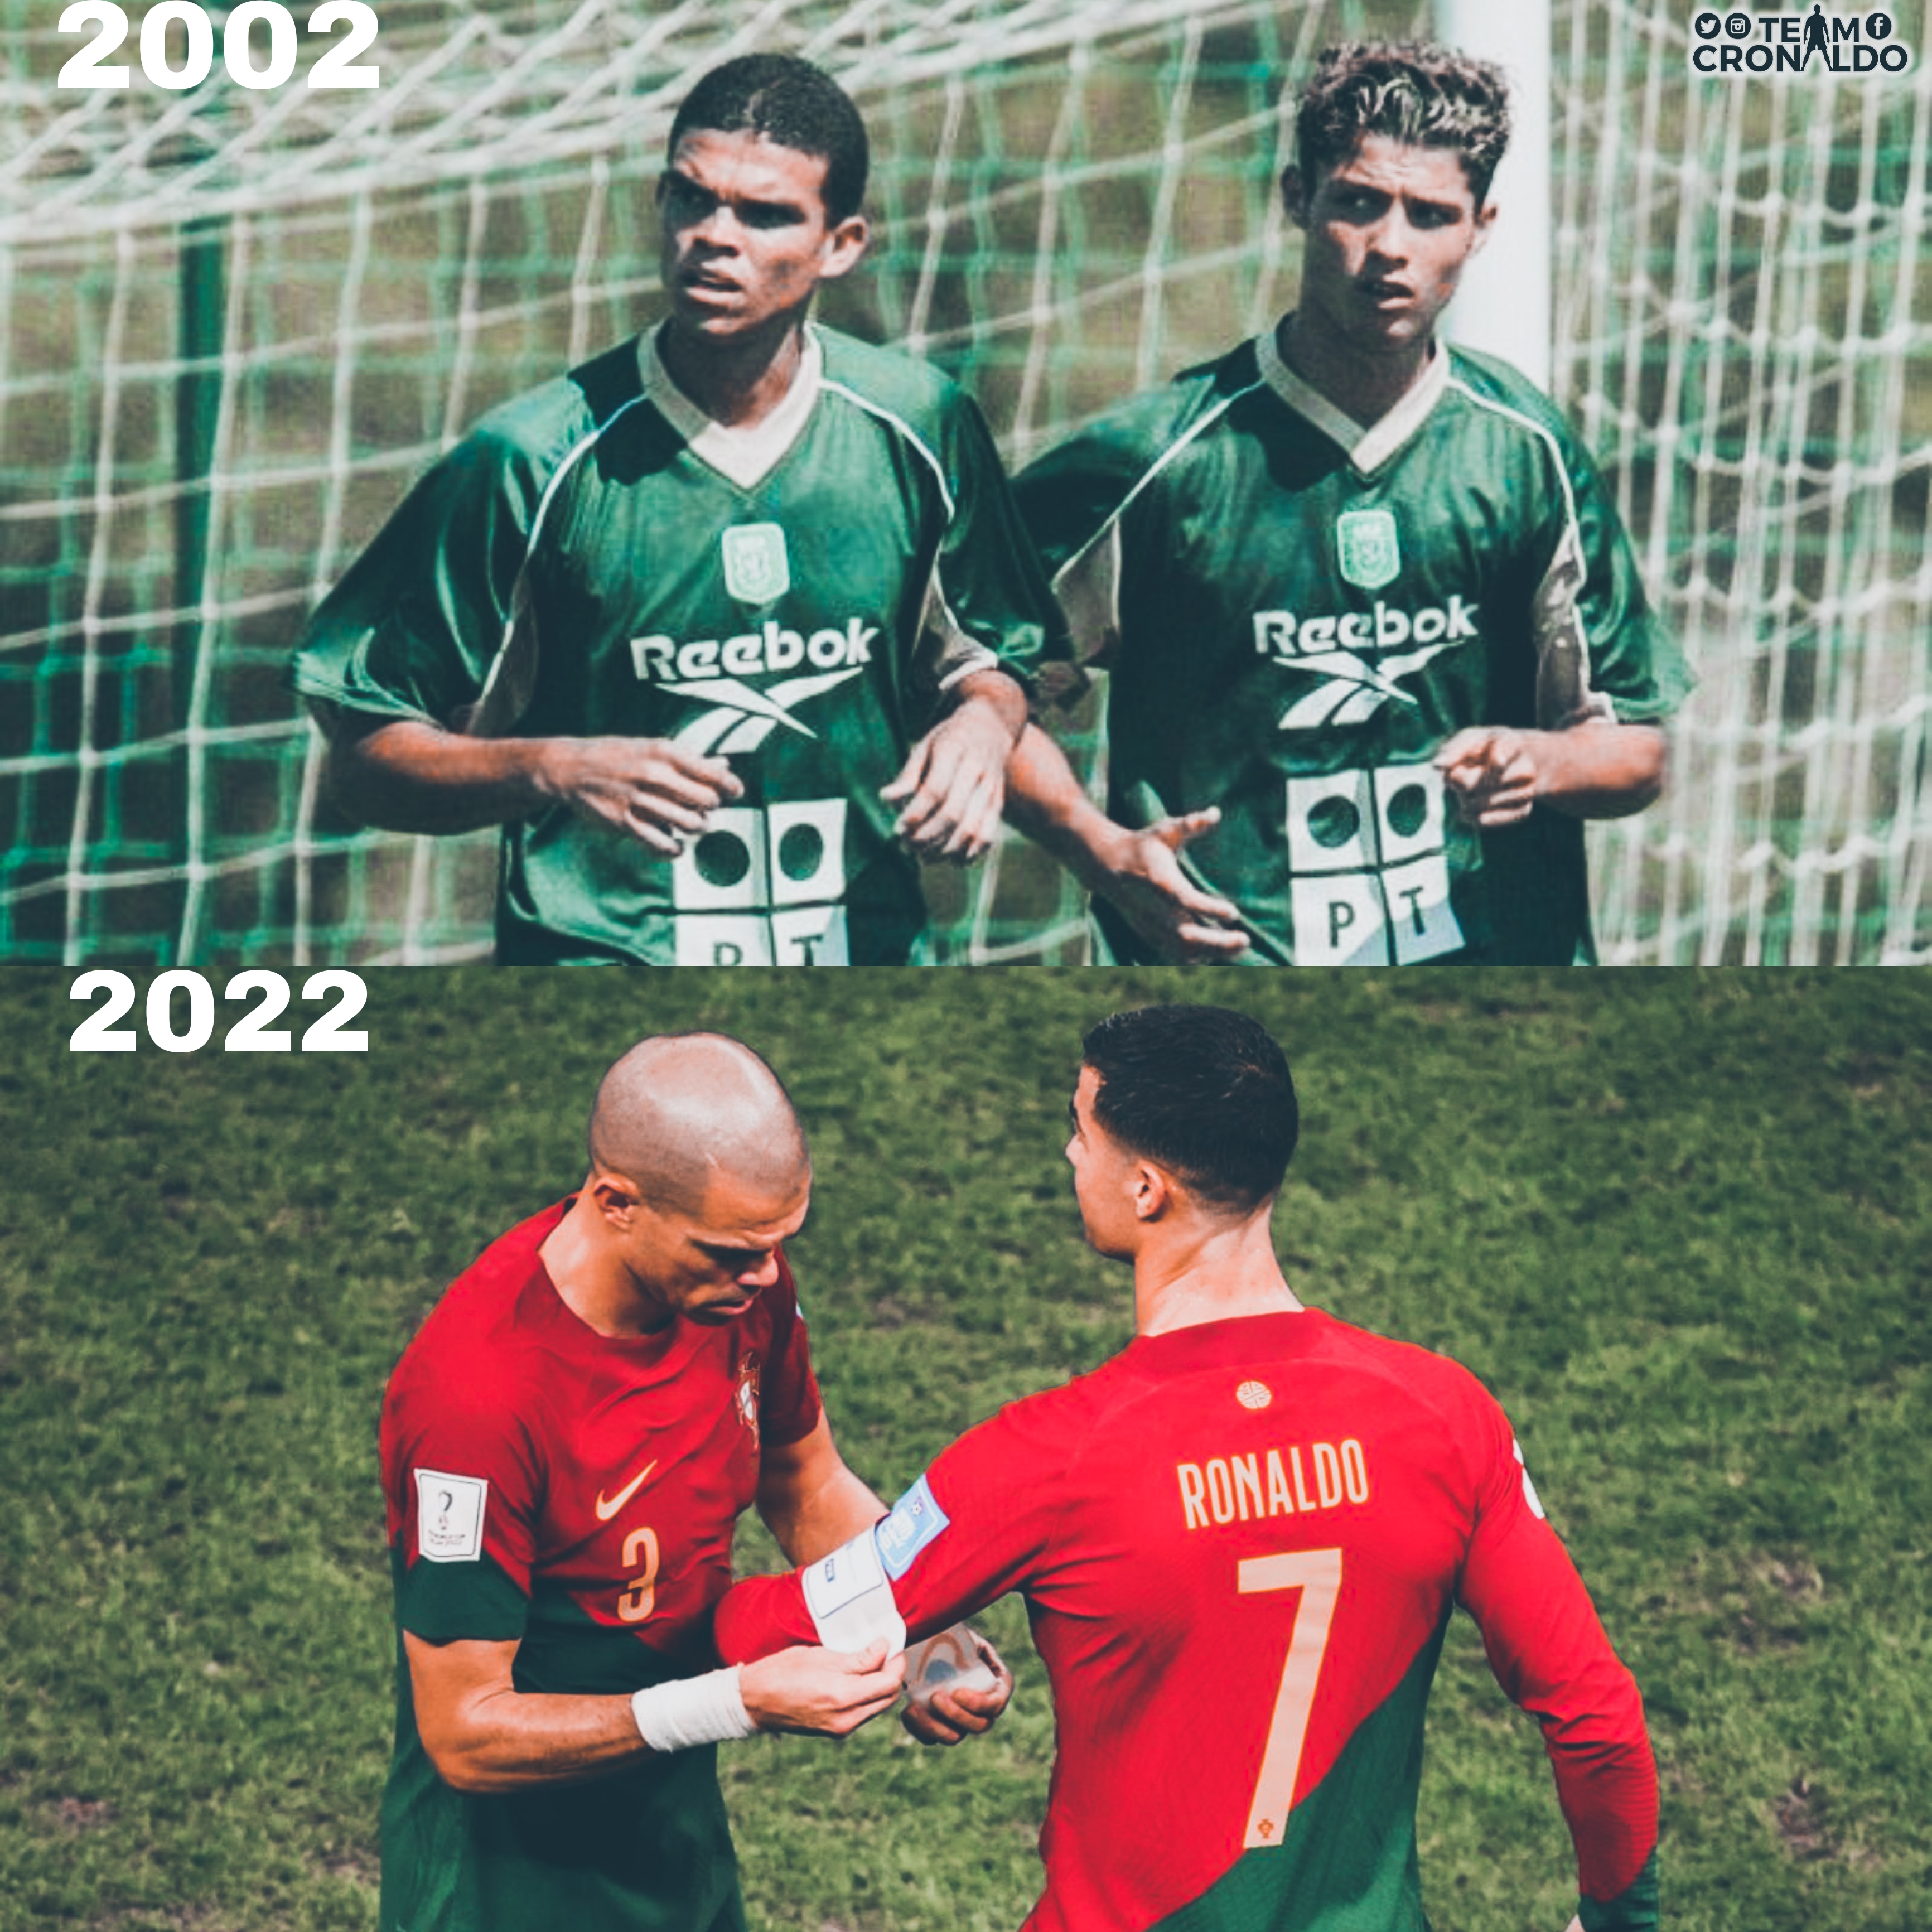 TCR. on X: 'They have come a long way from days in Sporting Lisbon.  Portugal were a nobody in International Football before Cristiano ronaldo  and Pepe came. They won them trophies and